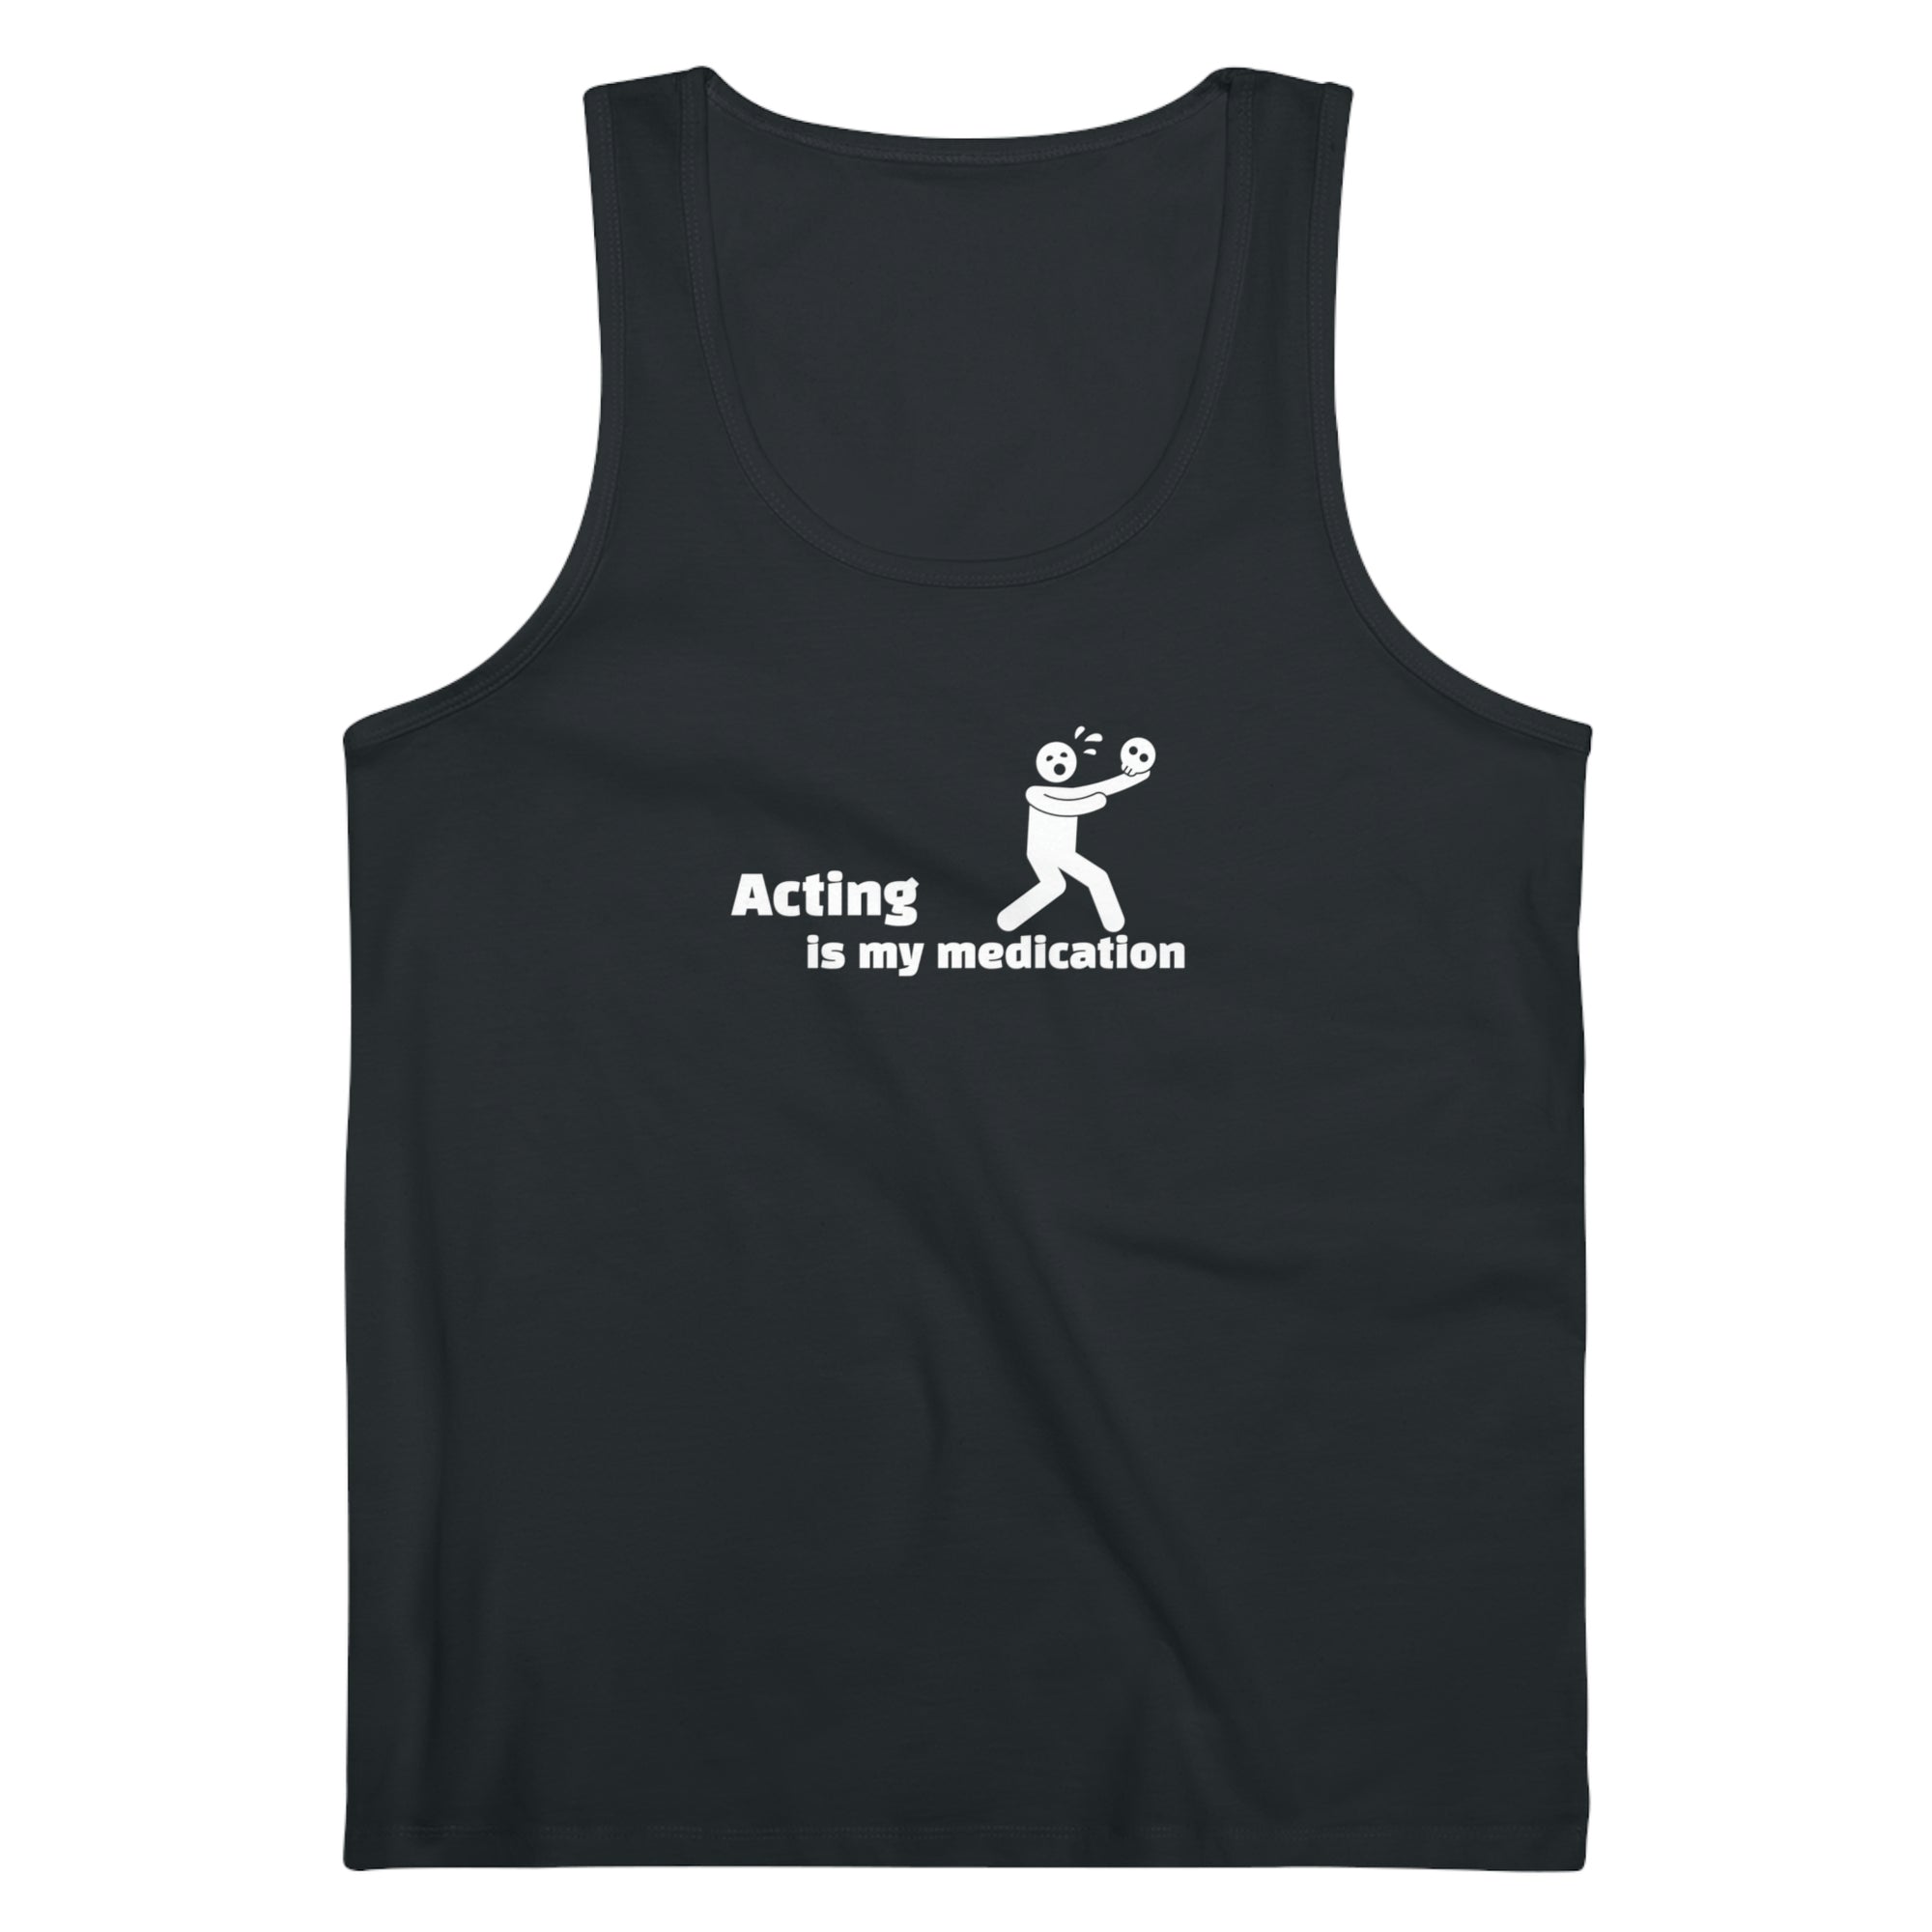 “Acting is my Meditation” Tank Top